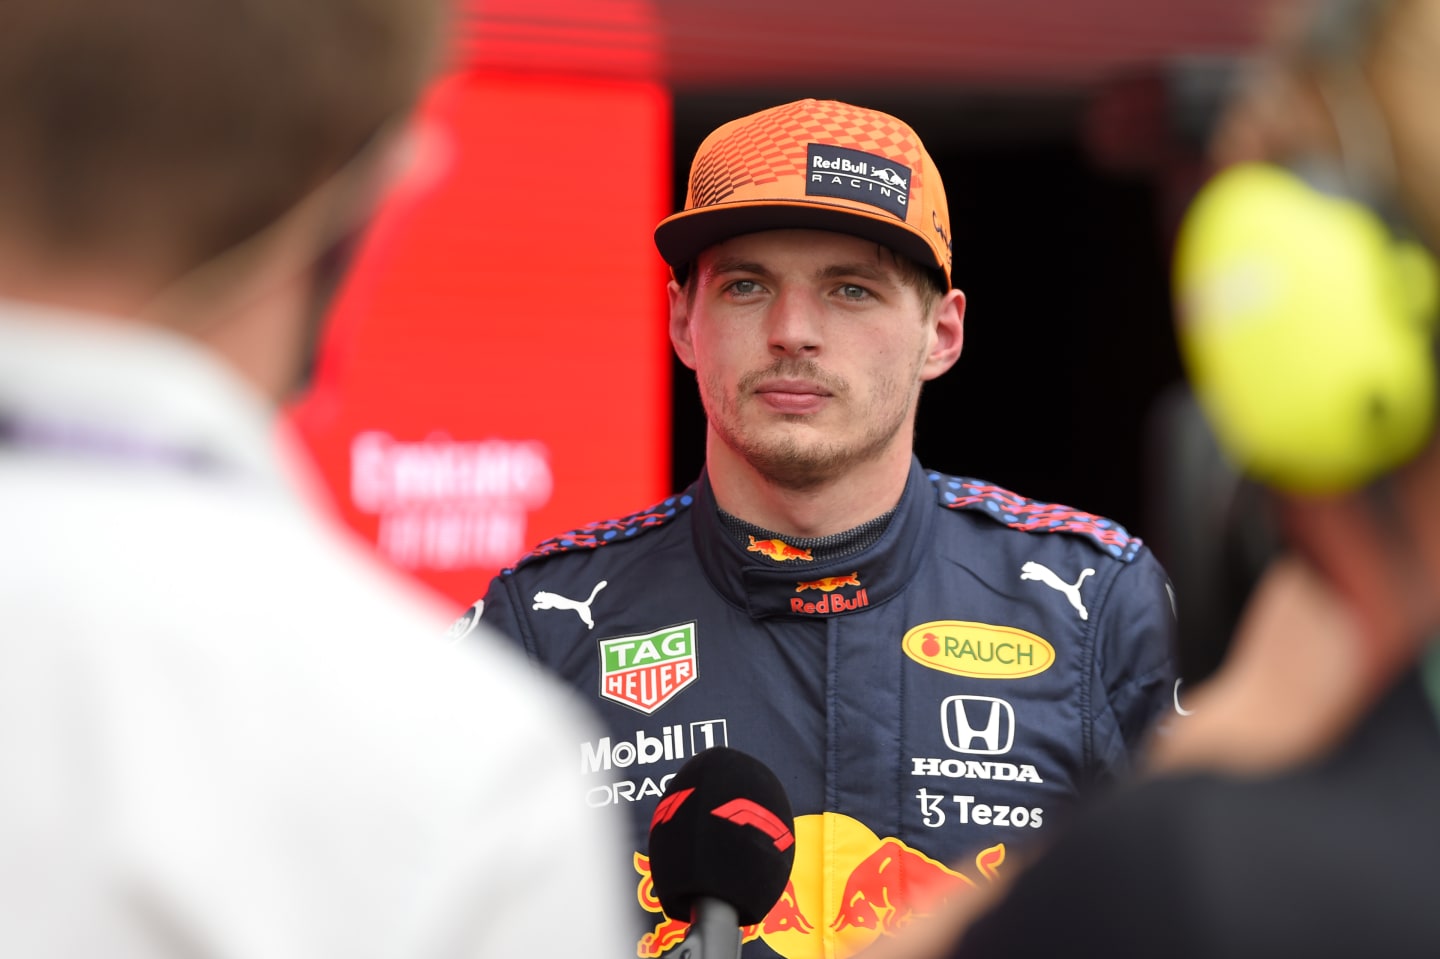 LE CASTELLET, FRANCE - JUNE 19: Pole position qualifier Max Verstappen of Netherlands and Red Bull Racing is interviewed after qualifying ahead of the F1 Grand Prix of France at Circuit Paul Ricard on June 19, 2021 in Le Castellet, France. (Photo by Nicolas Tucat - Pool/Getty Images)